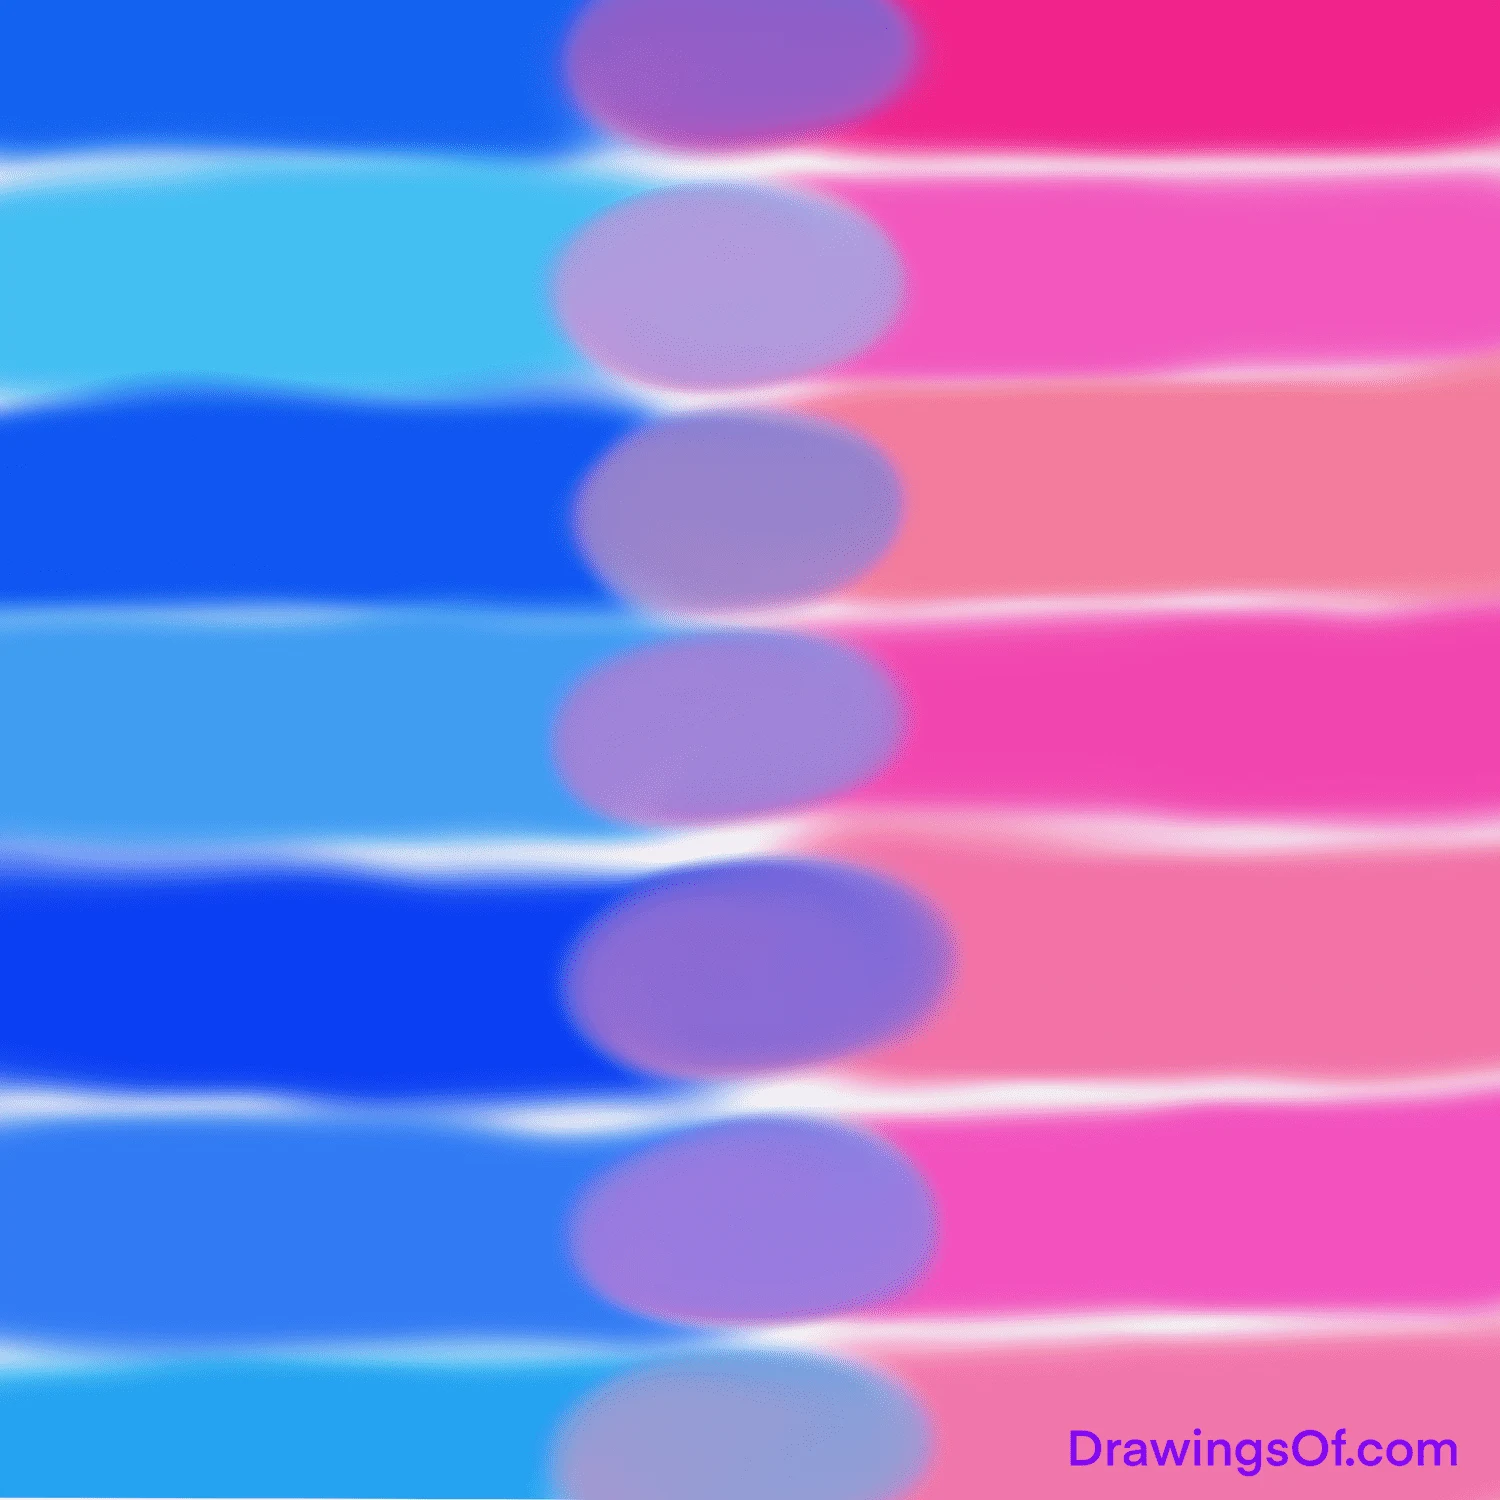 What color do pink and blue make?